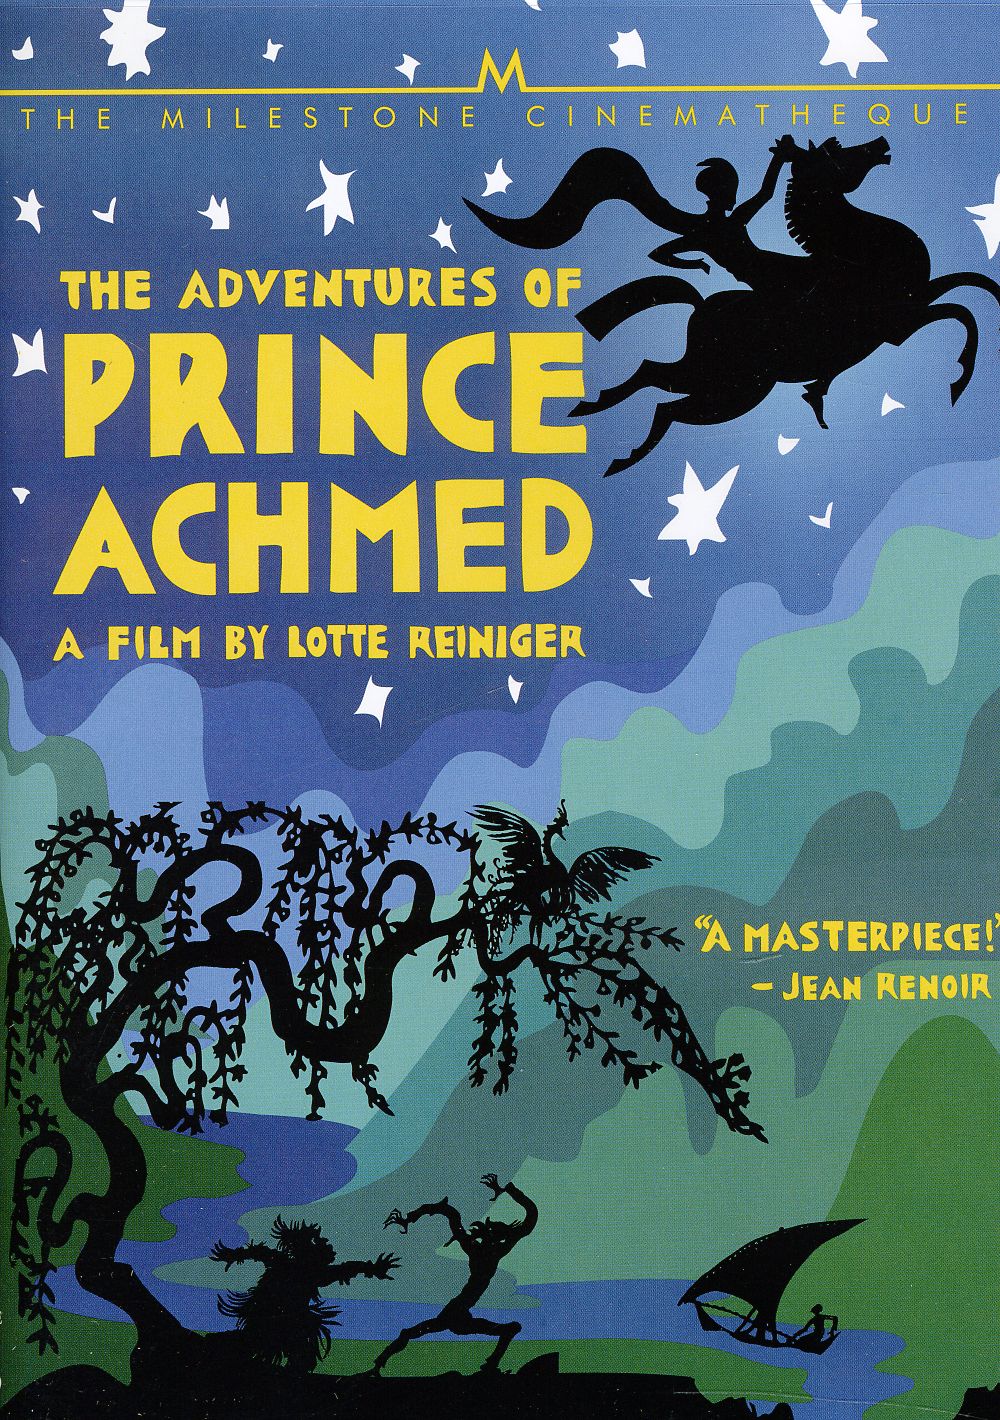 ADVENTURES OF PRINCE ACHMED